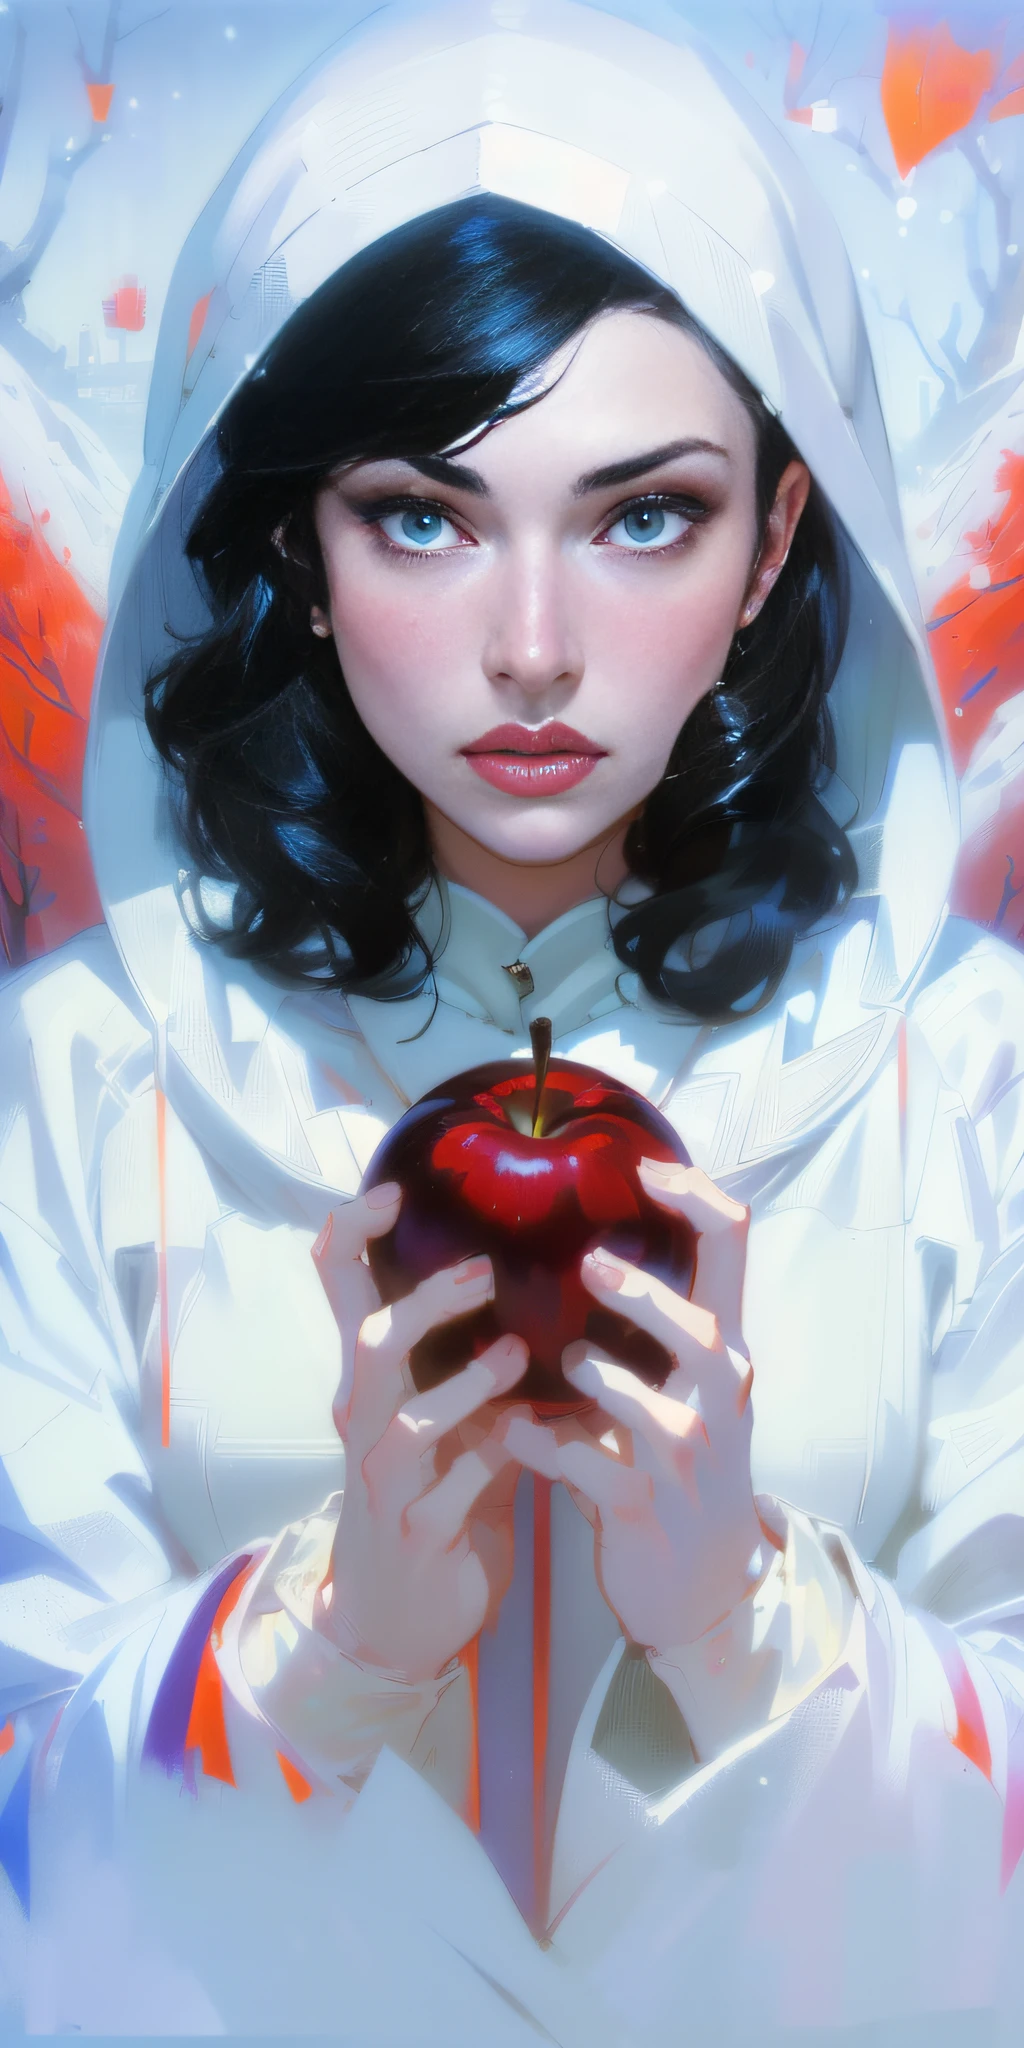 a close up of a person holding an apple in front of a tree, snow white, martin ansin, portrait of snow white, martin ansin artwork portrait, adam hughes, chris moore. artgerm, pale snow white skin, artgerm greg rutkowski _ greg, artgerm and james jean, artgerm and ilya kuvshinov